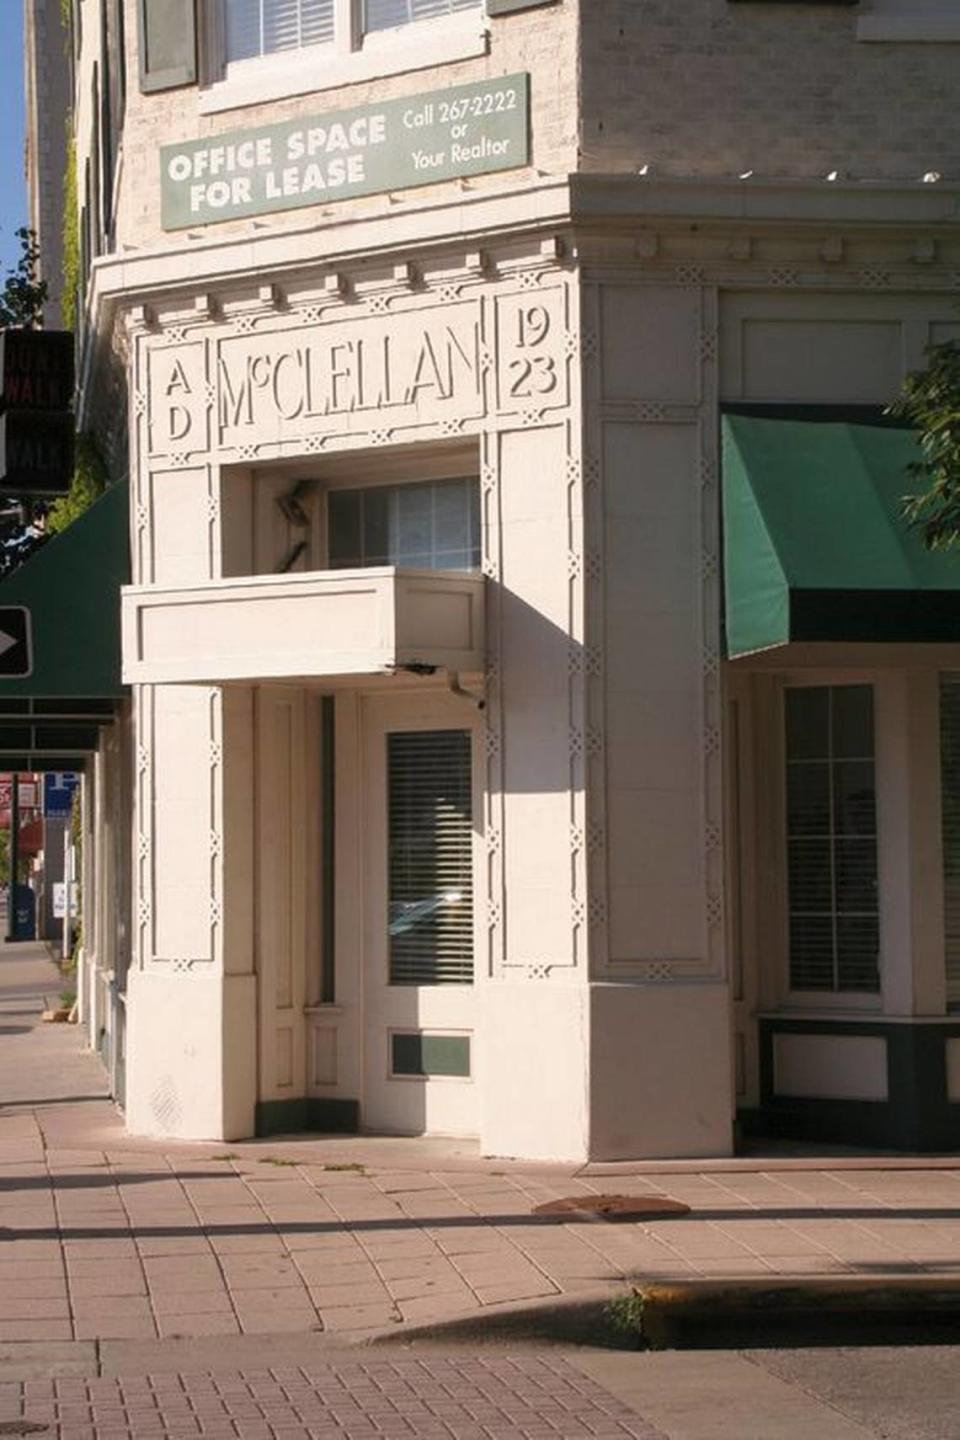 The five-story McClellan Hotel building at the southwest corner of William and Broadway, better known to some as the former O’Rourke Title Building, was added to the Register of Historic Kansas Places this summer.